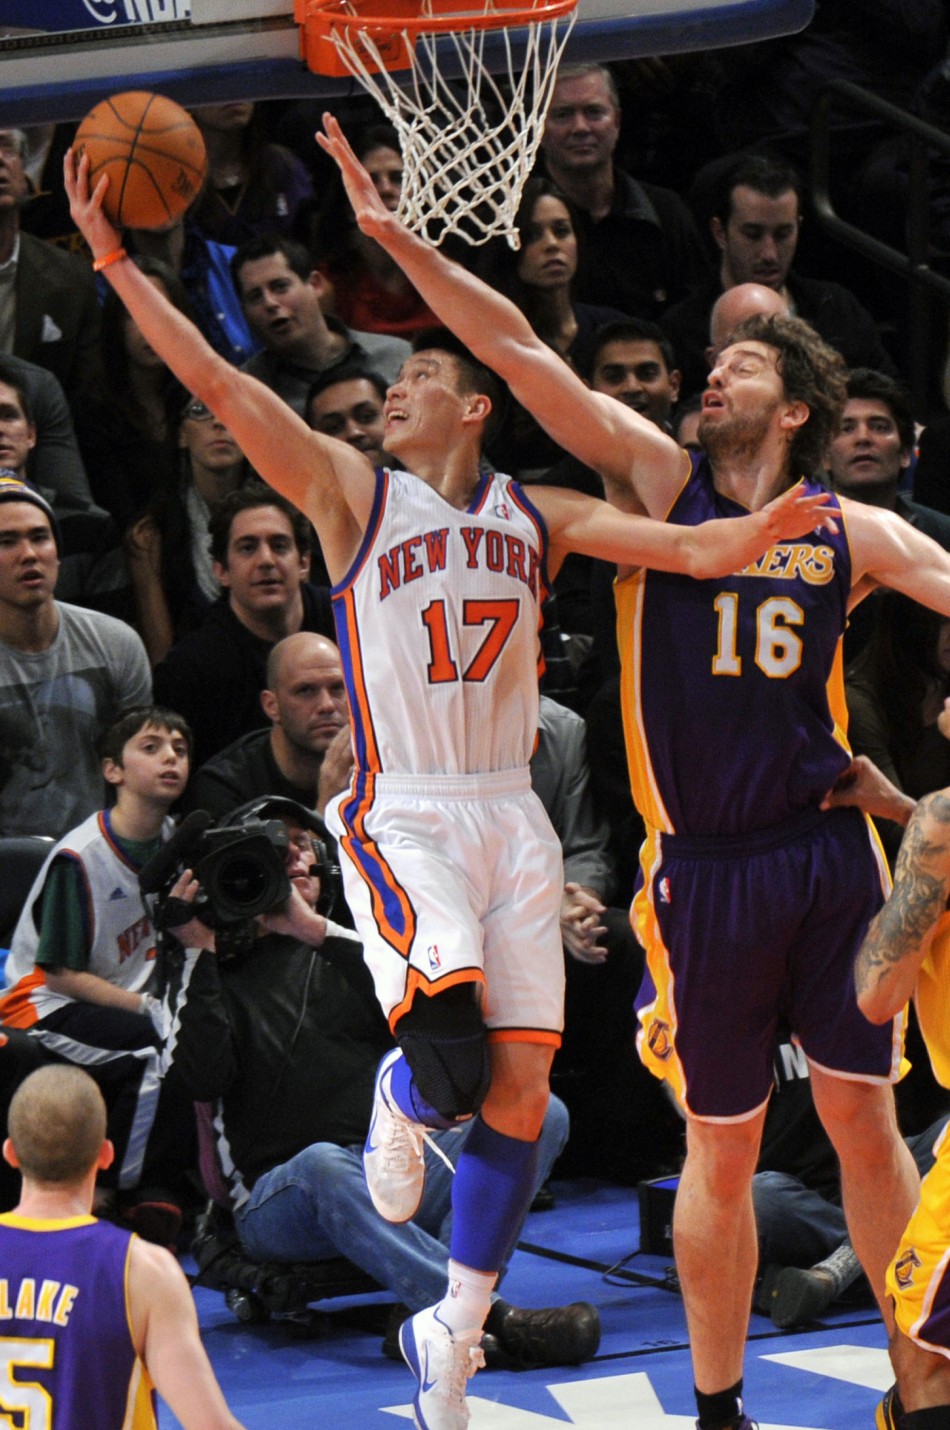 New York Knicks Jeremy Lin makes layup past Los Angeles Lakers Pau Gasol in NBA game in New York